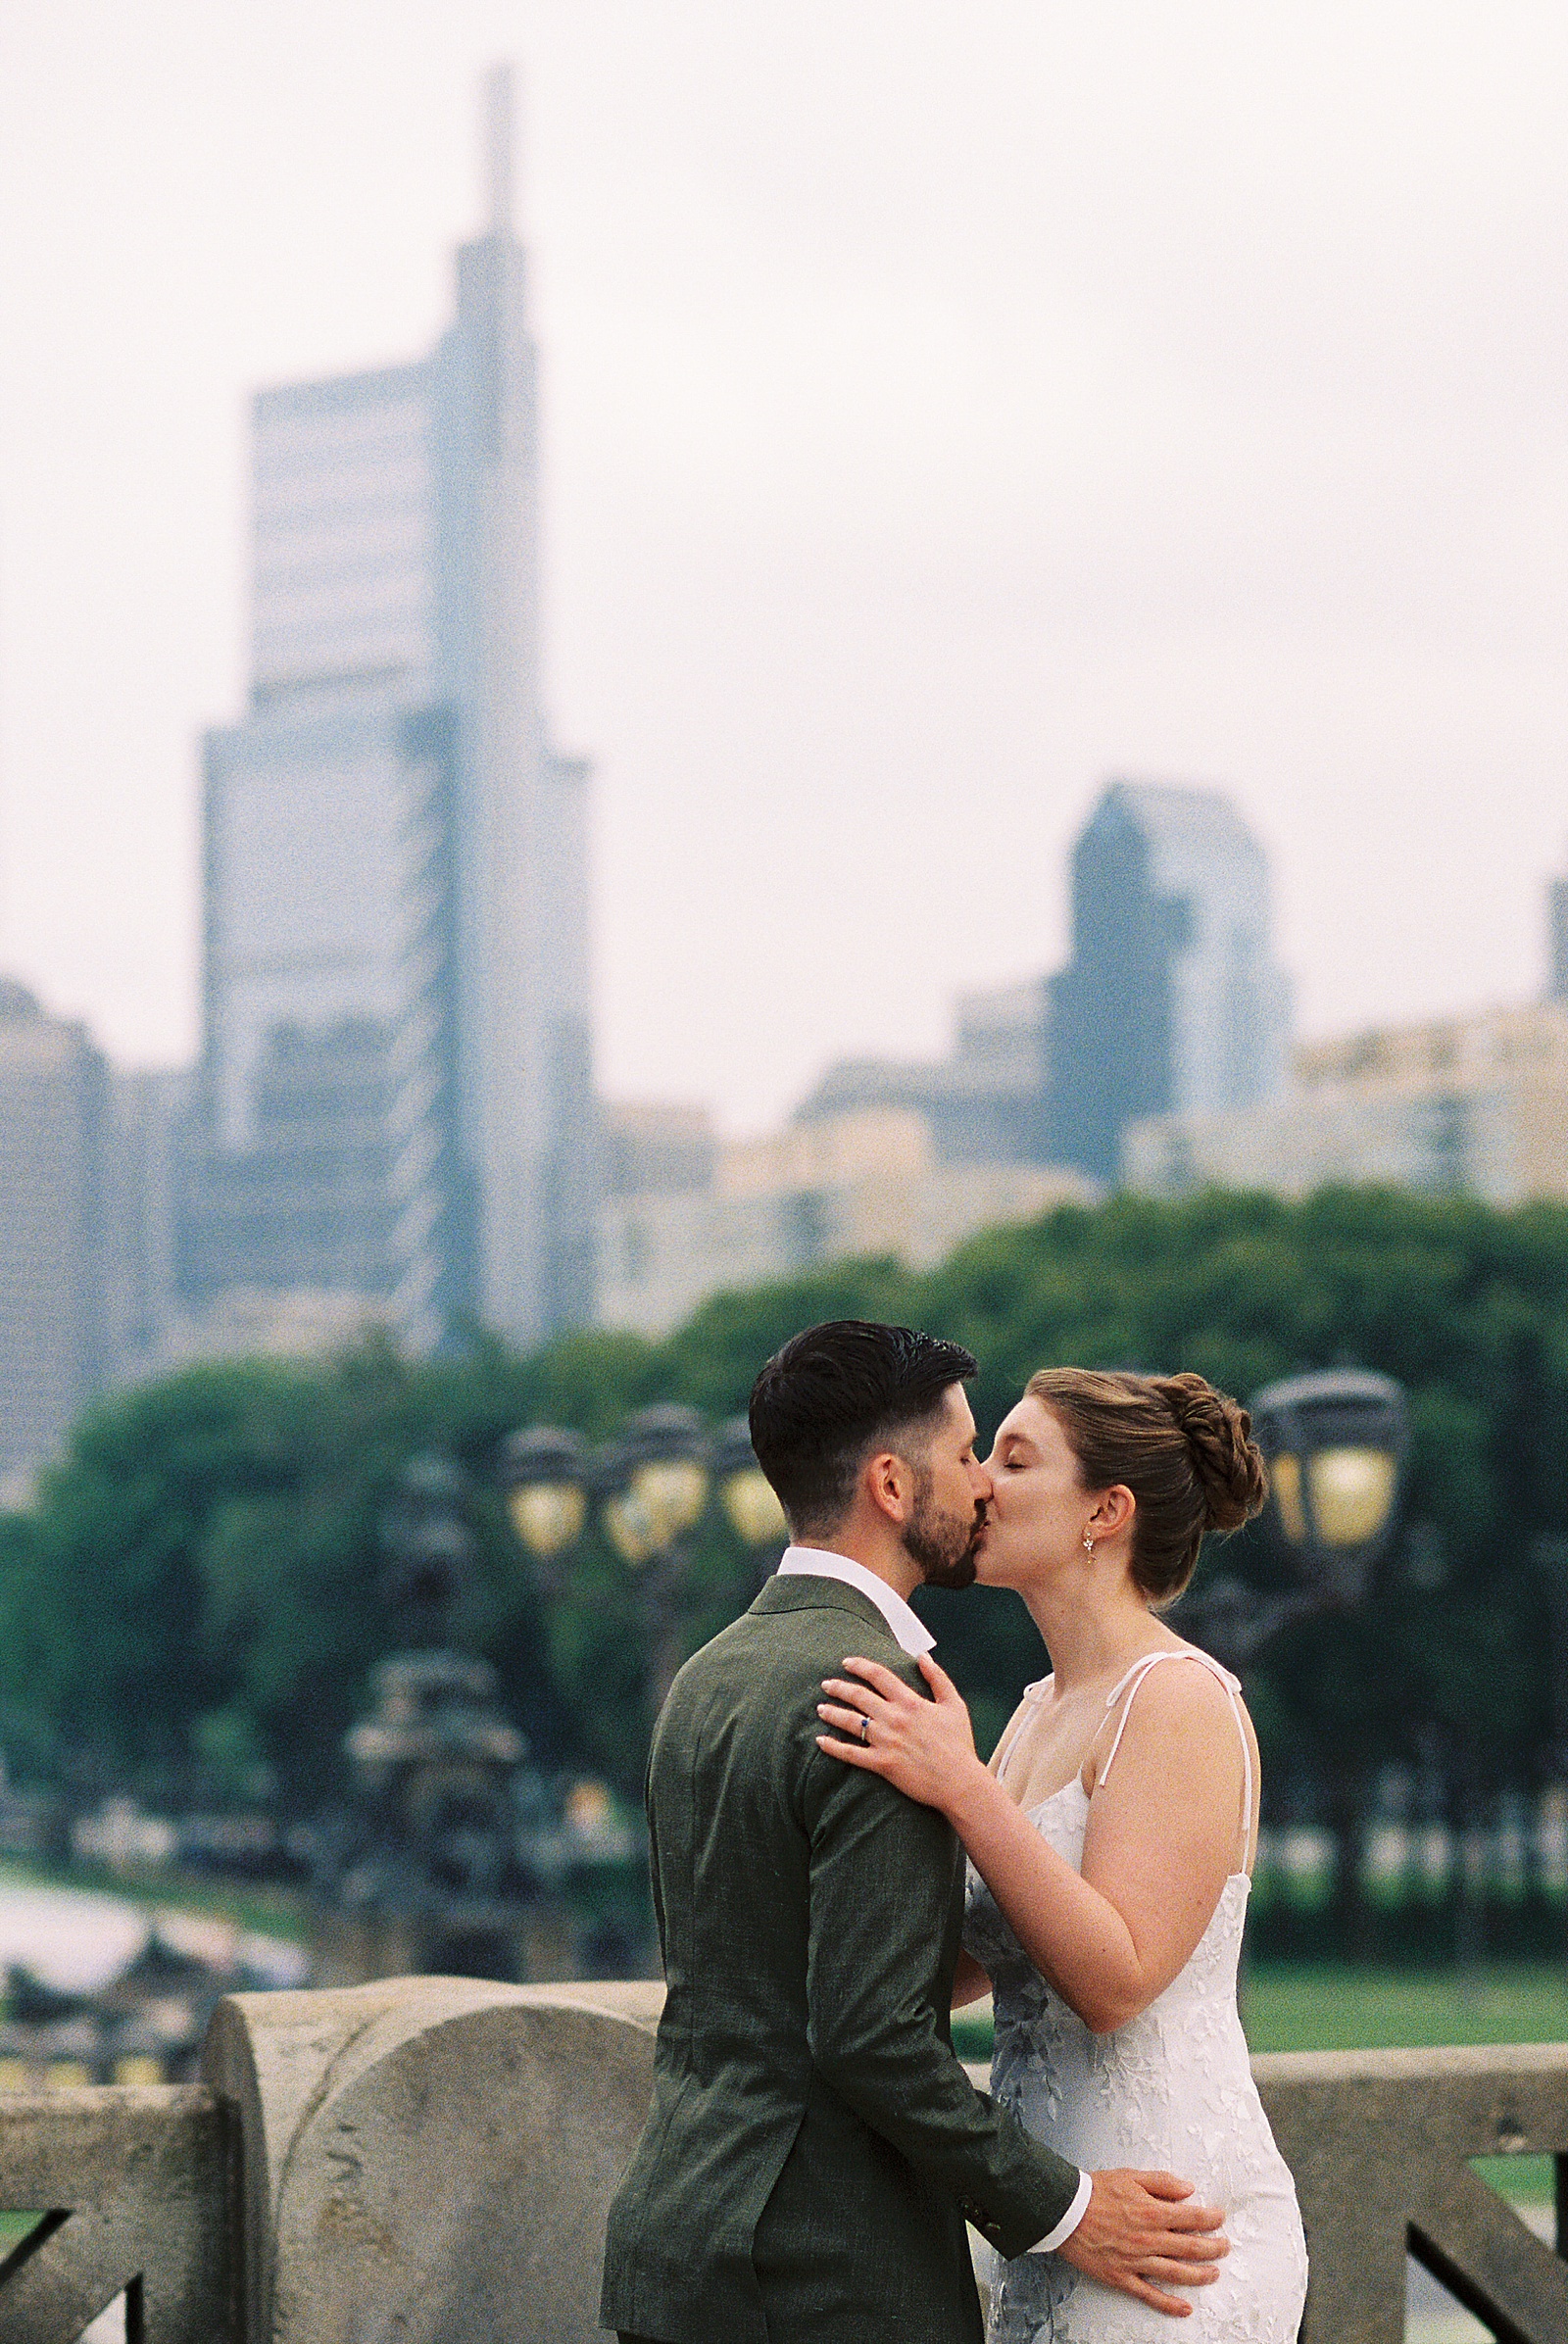 A bride and groom kiss in front of the Philadelphia skyline before their self-uniting ceremony at Fairmount Park.